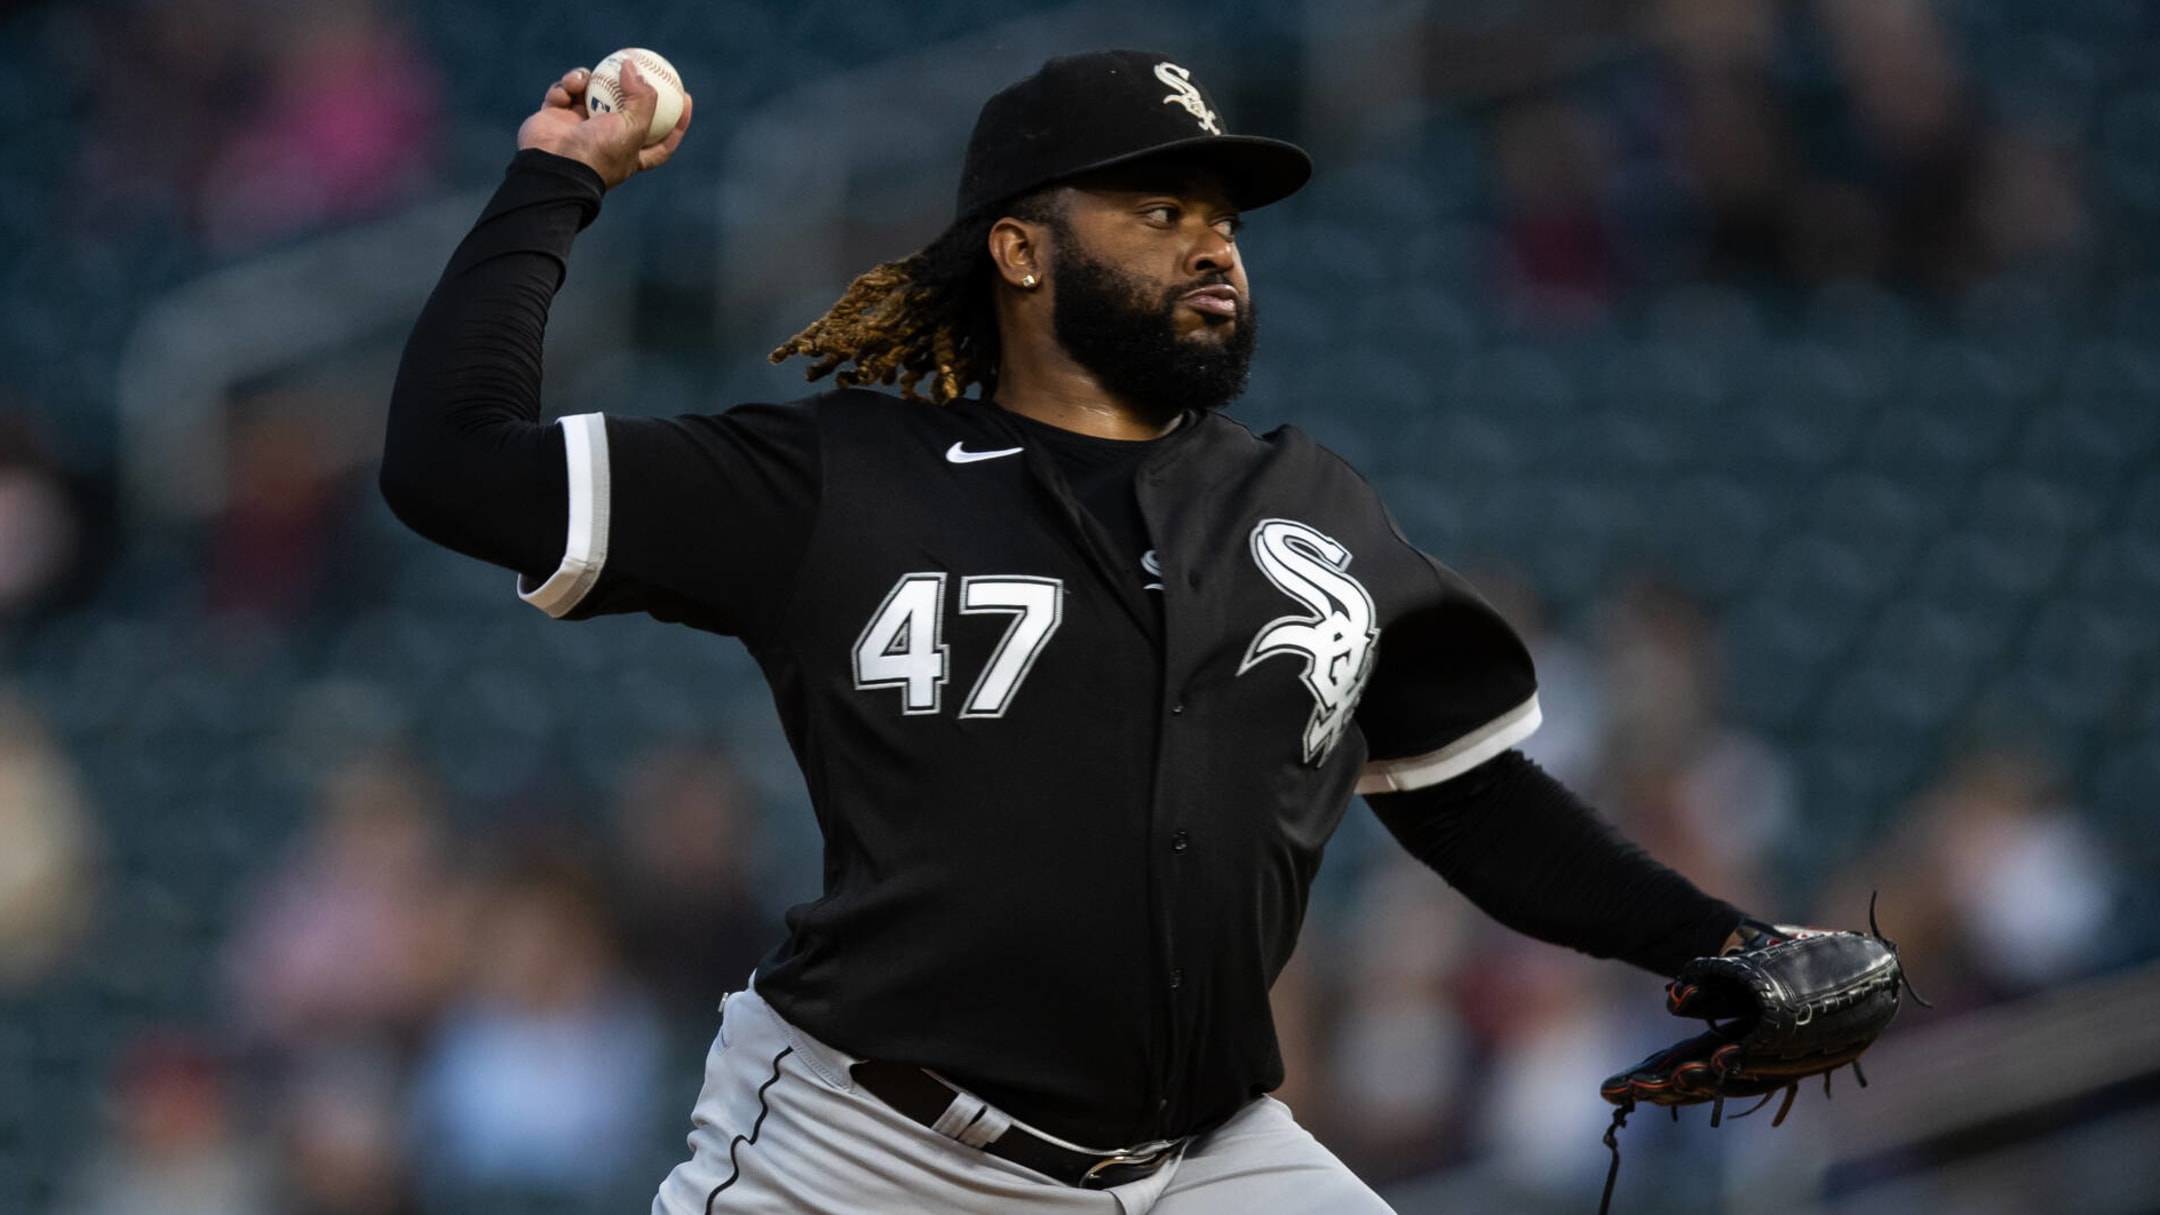 Johnny Cueto's outing vs. Royals, 08/10/2022